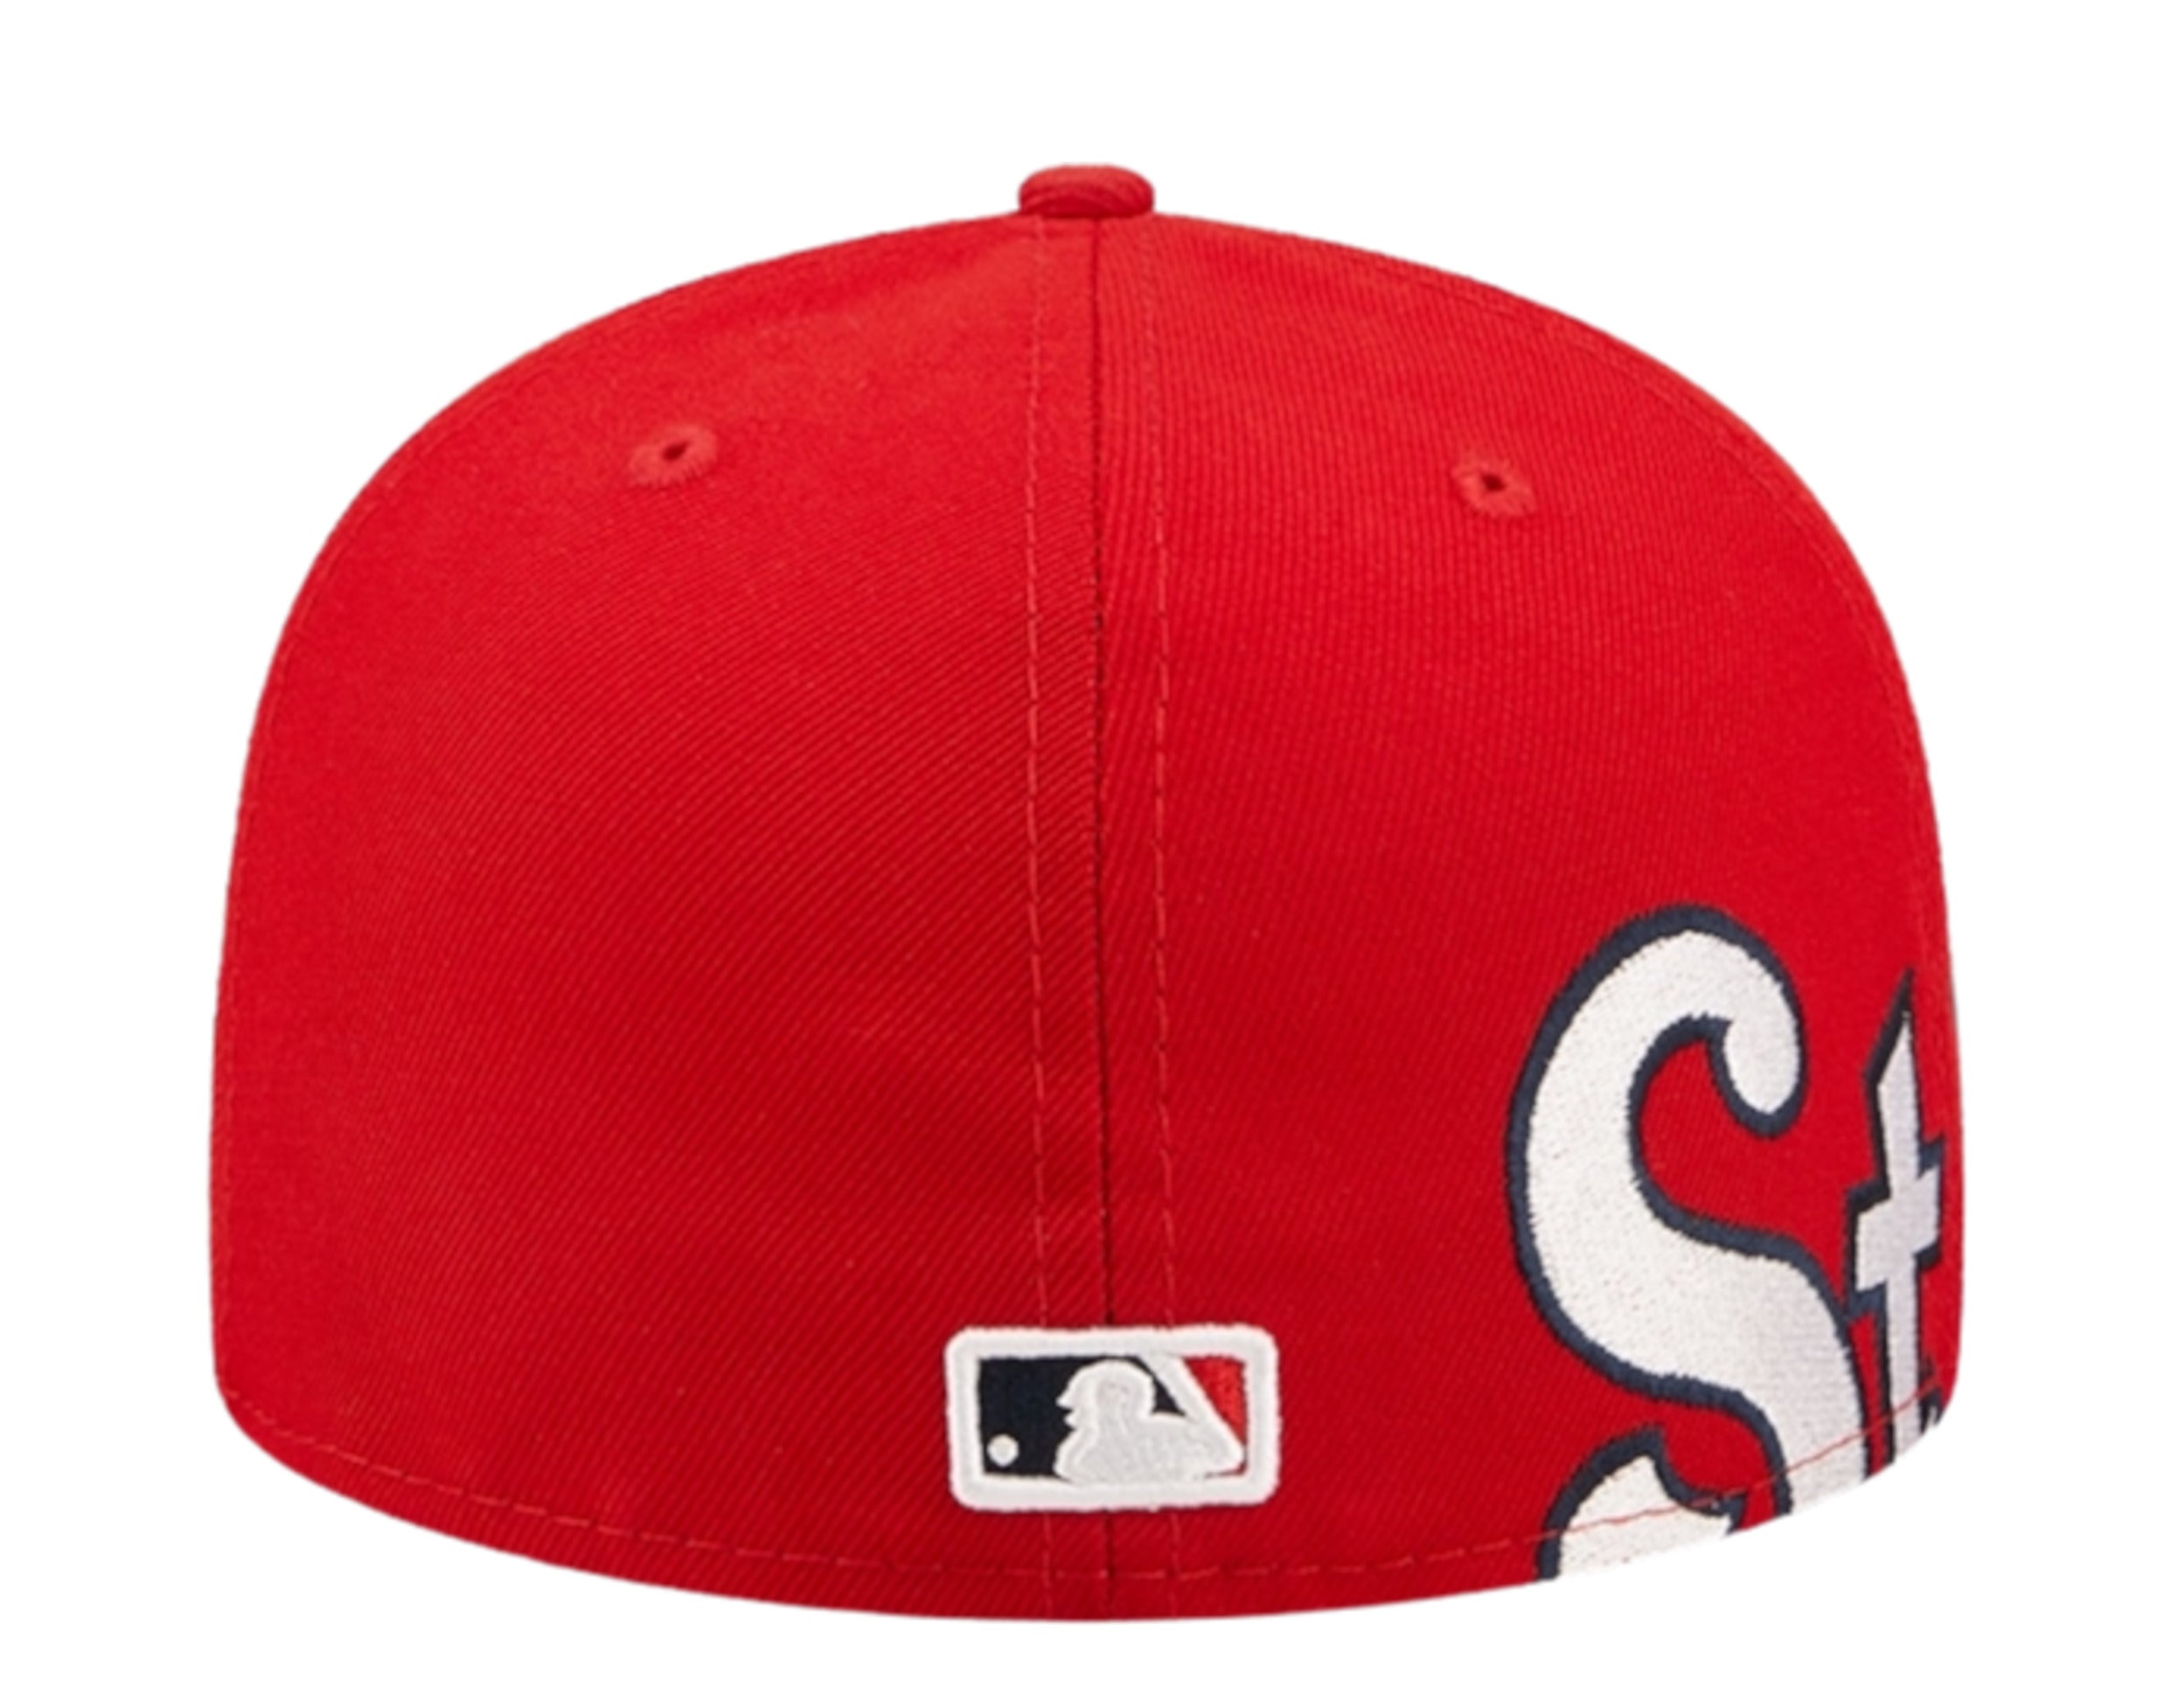 New Era 59FIFTY MLB St. Louis Cardinals Sidesplit Fitted Hat